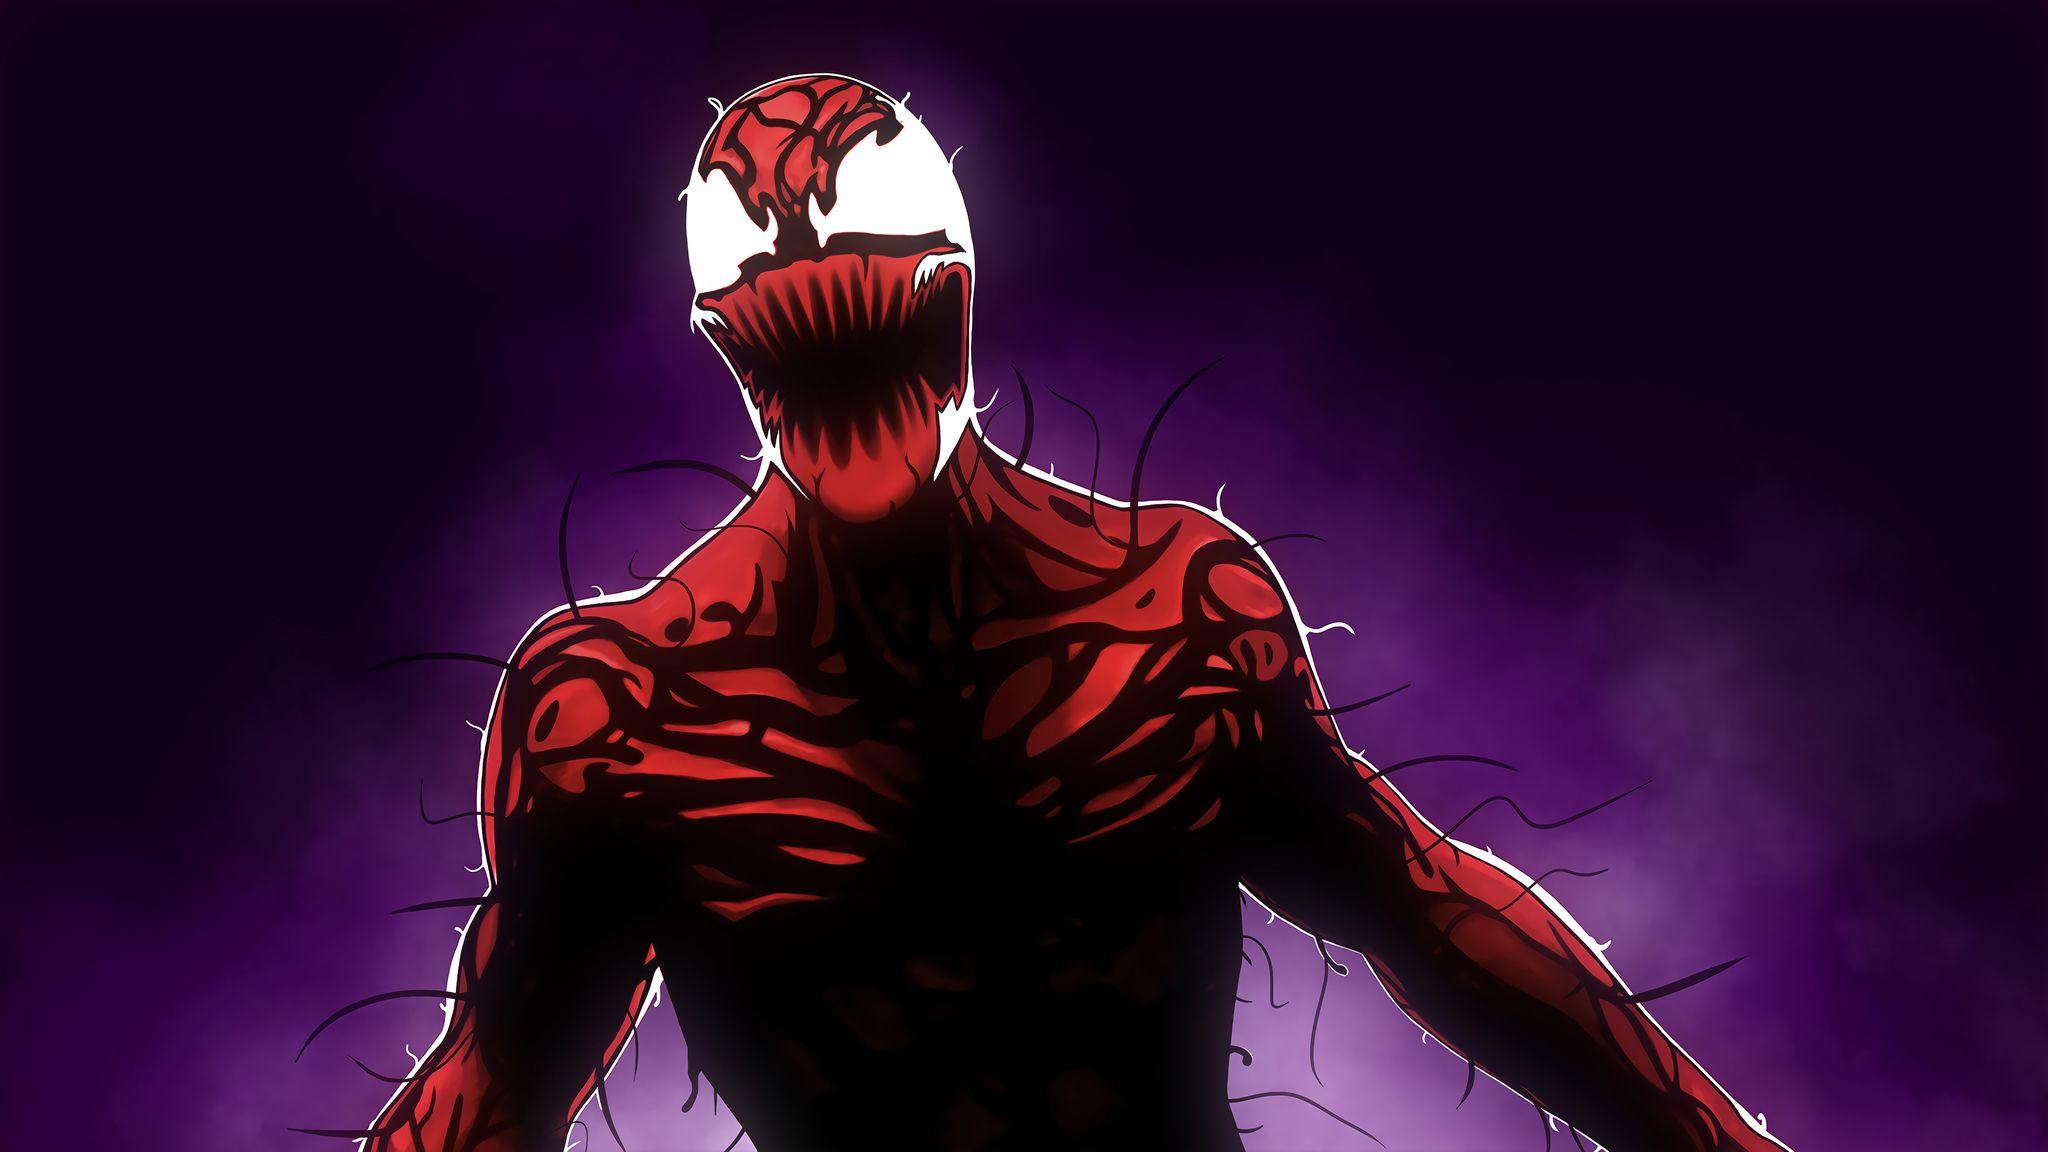 Carnage From Marvels Spider Man Series 2048x1152